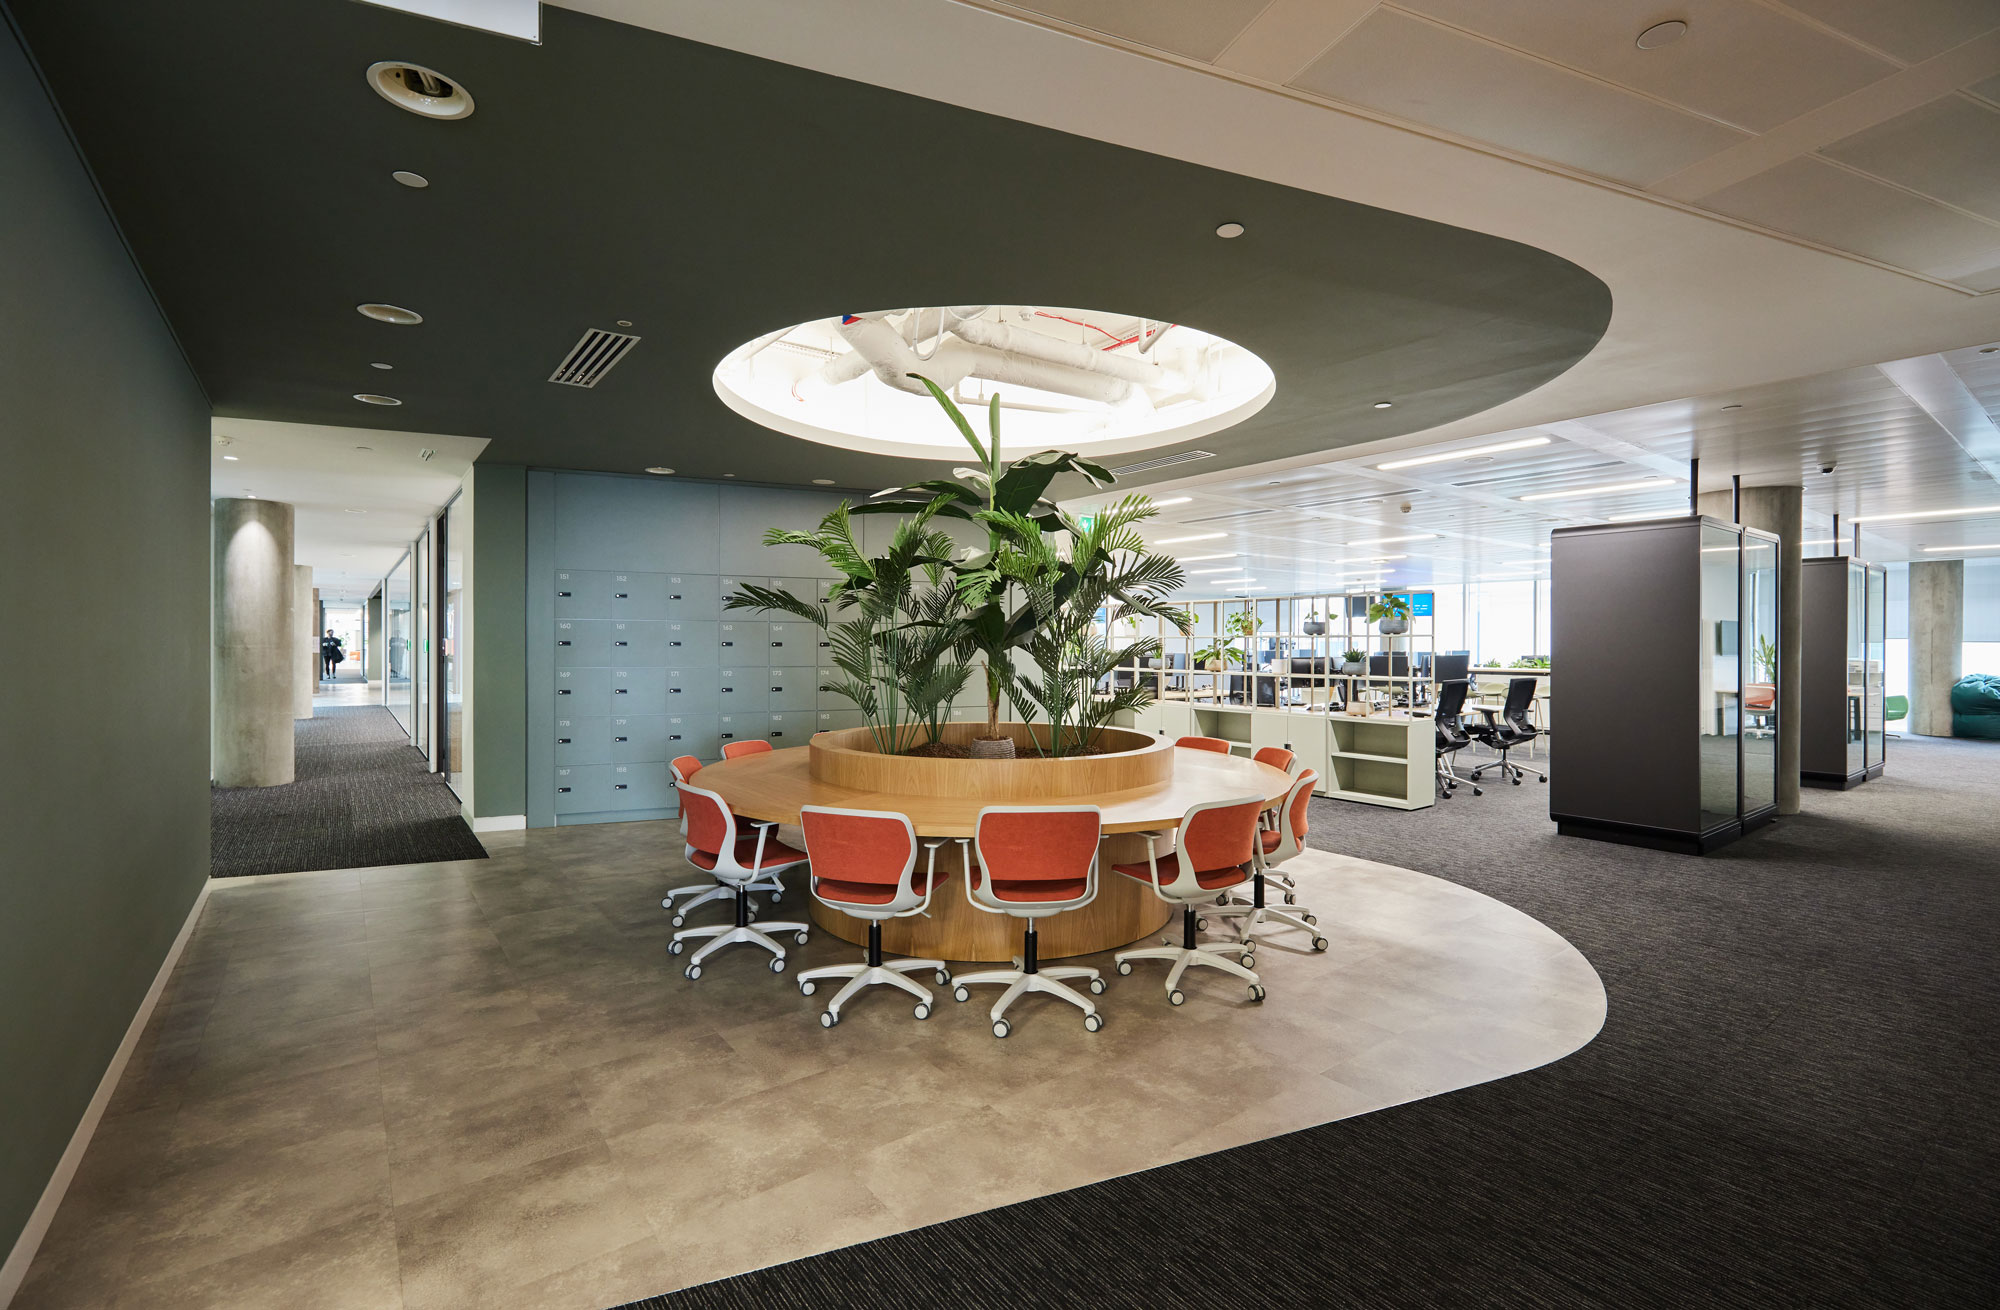 Open plan office with central collaborative working area, dressed with flourishing greenery